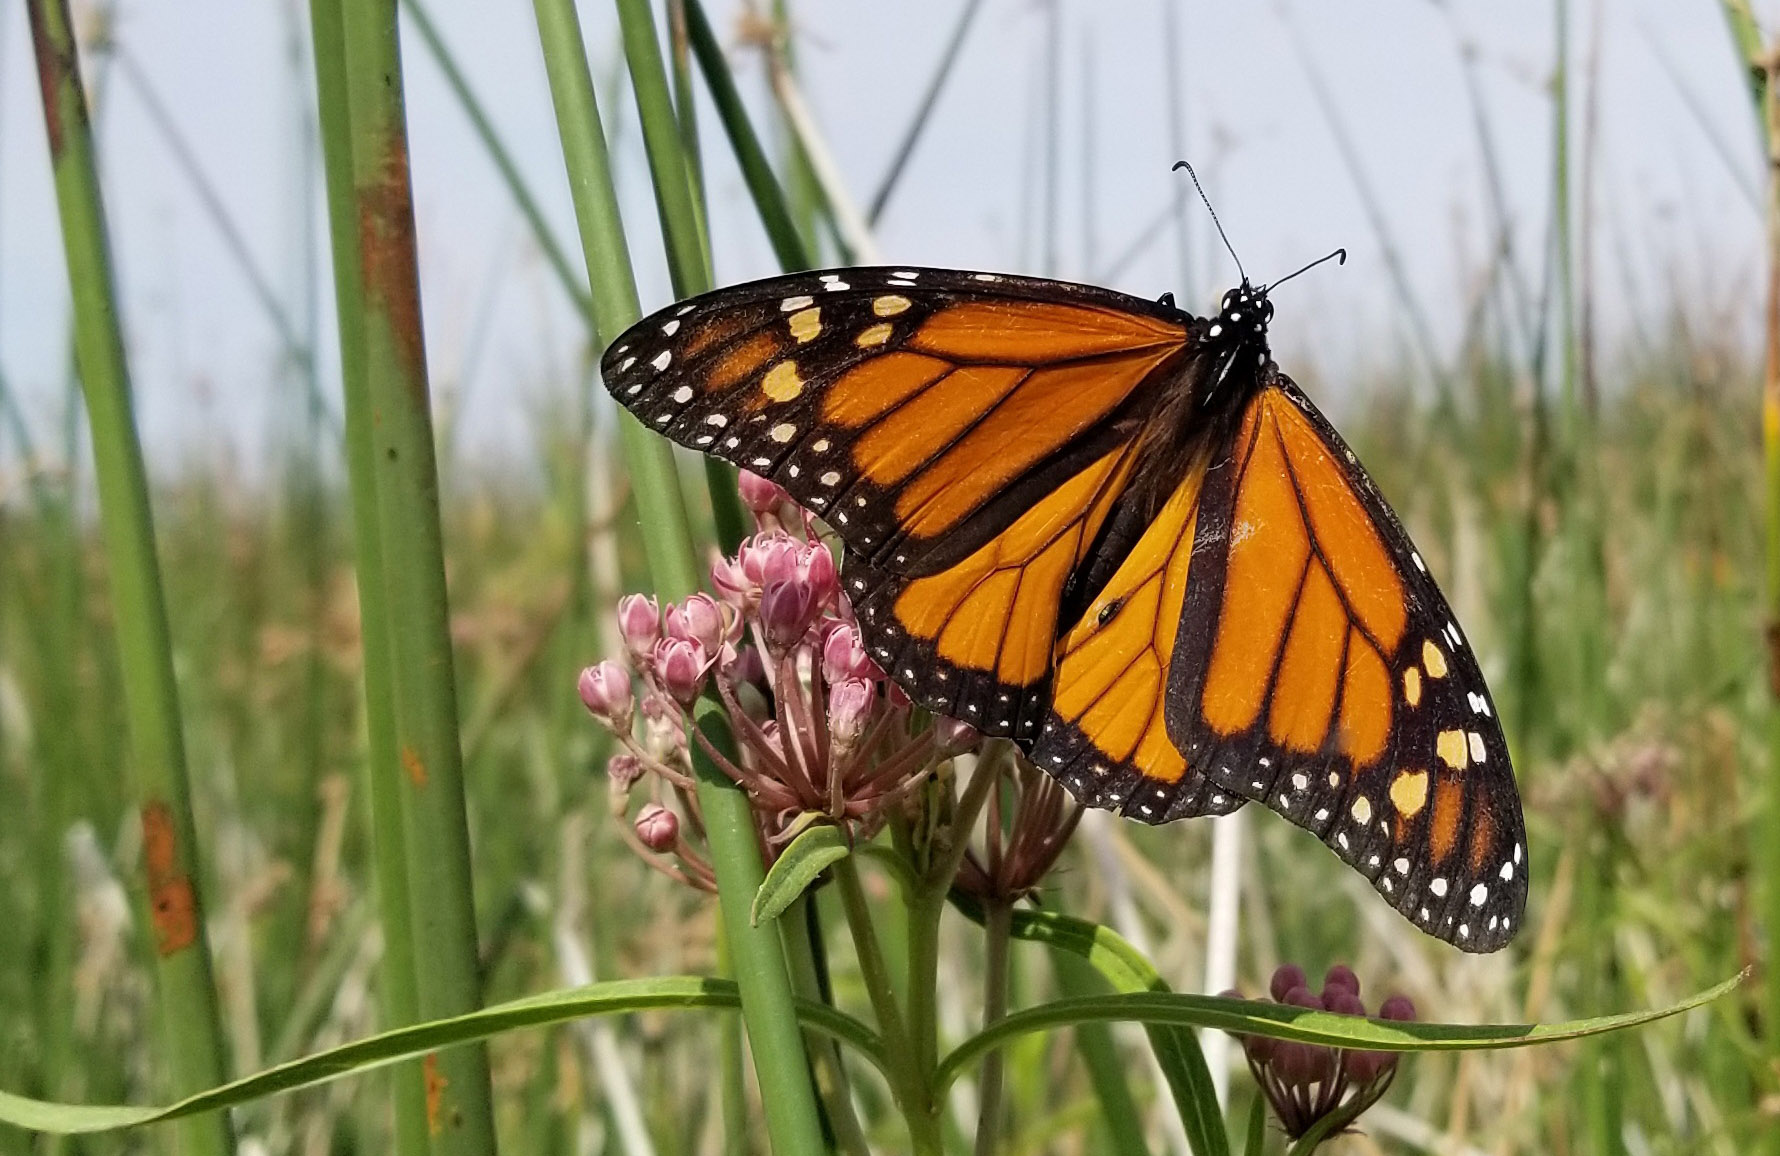 There are actually two species of monarch butterflies living in the Western Hemisphere. These species live in either North America or South America. However, the one place they can both coexist safely is, believe it or not, the Caribbean.